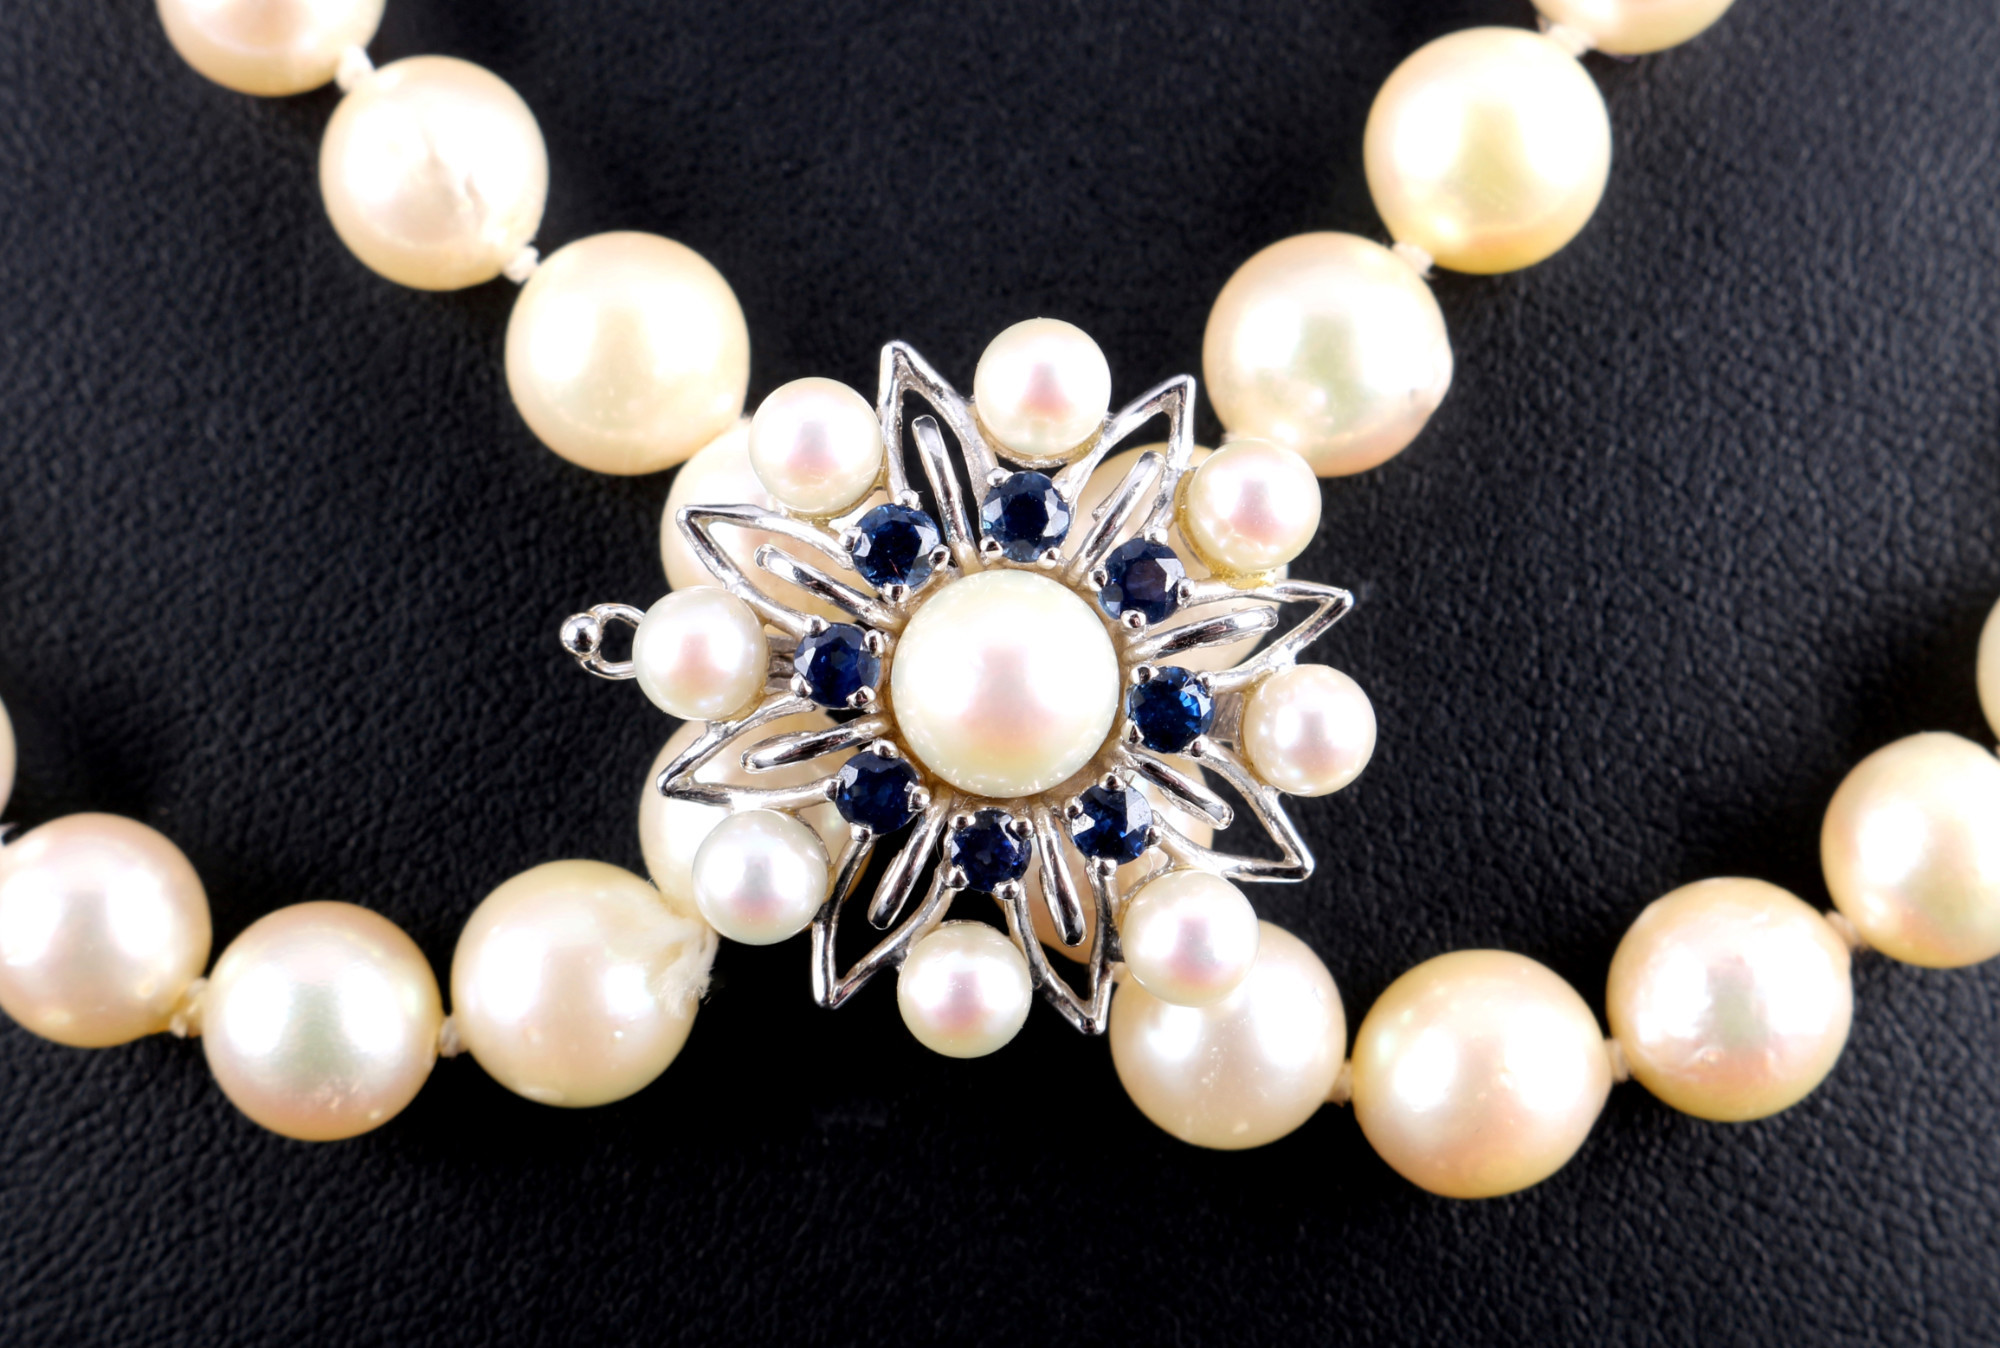 Pearl necklace with large 14K gold clip, Perlenkette / Collier mit 585 Gold Clipverschluss, - Image 3 of 7